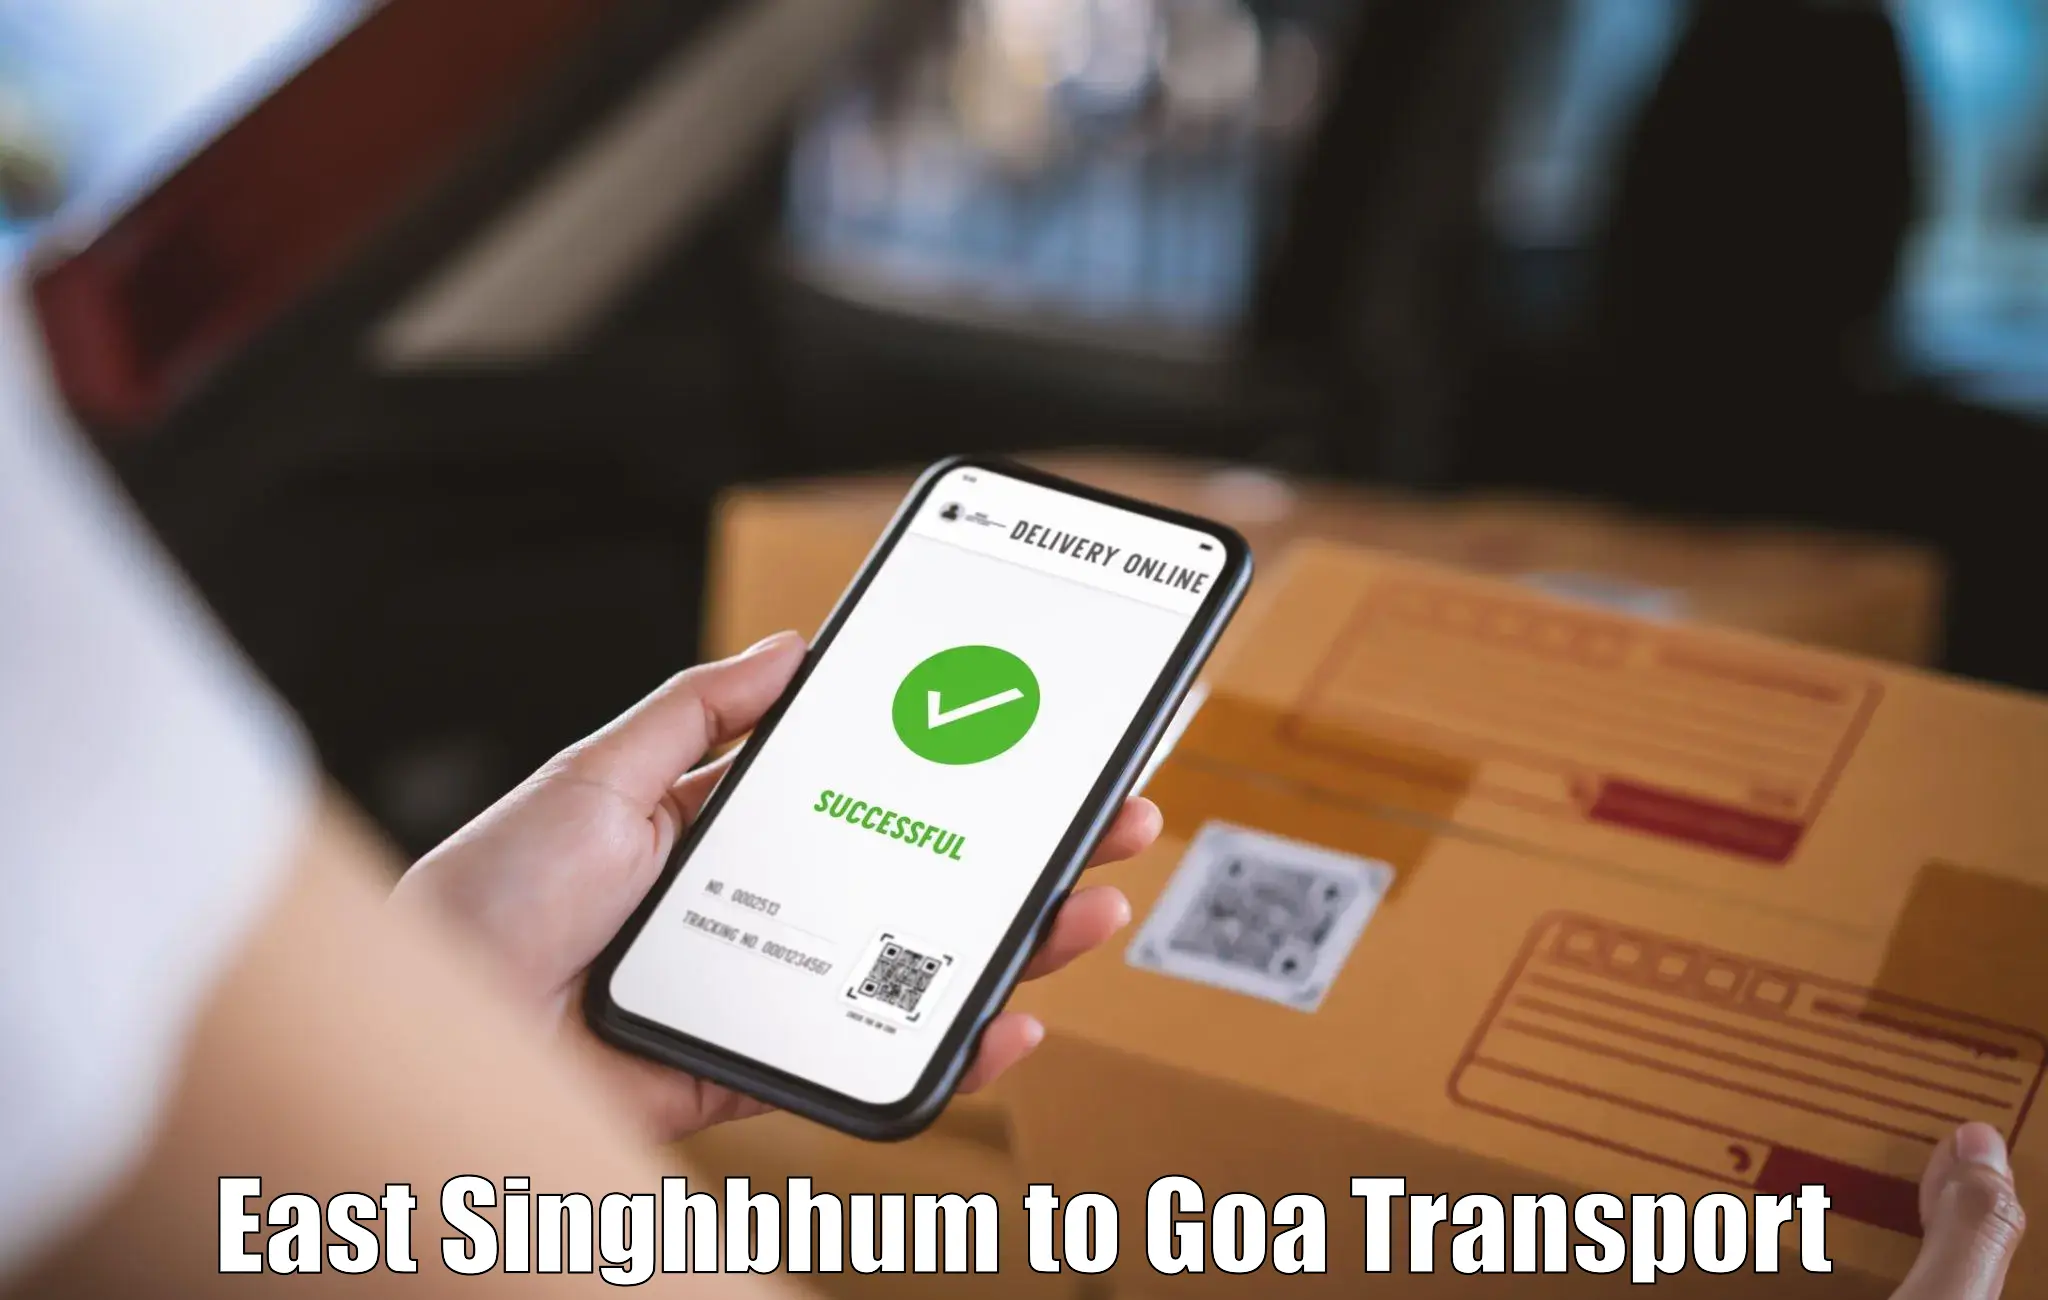 Container transport service East Singhbhum to Goa